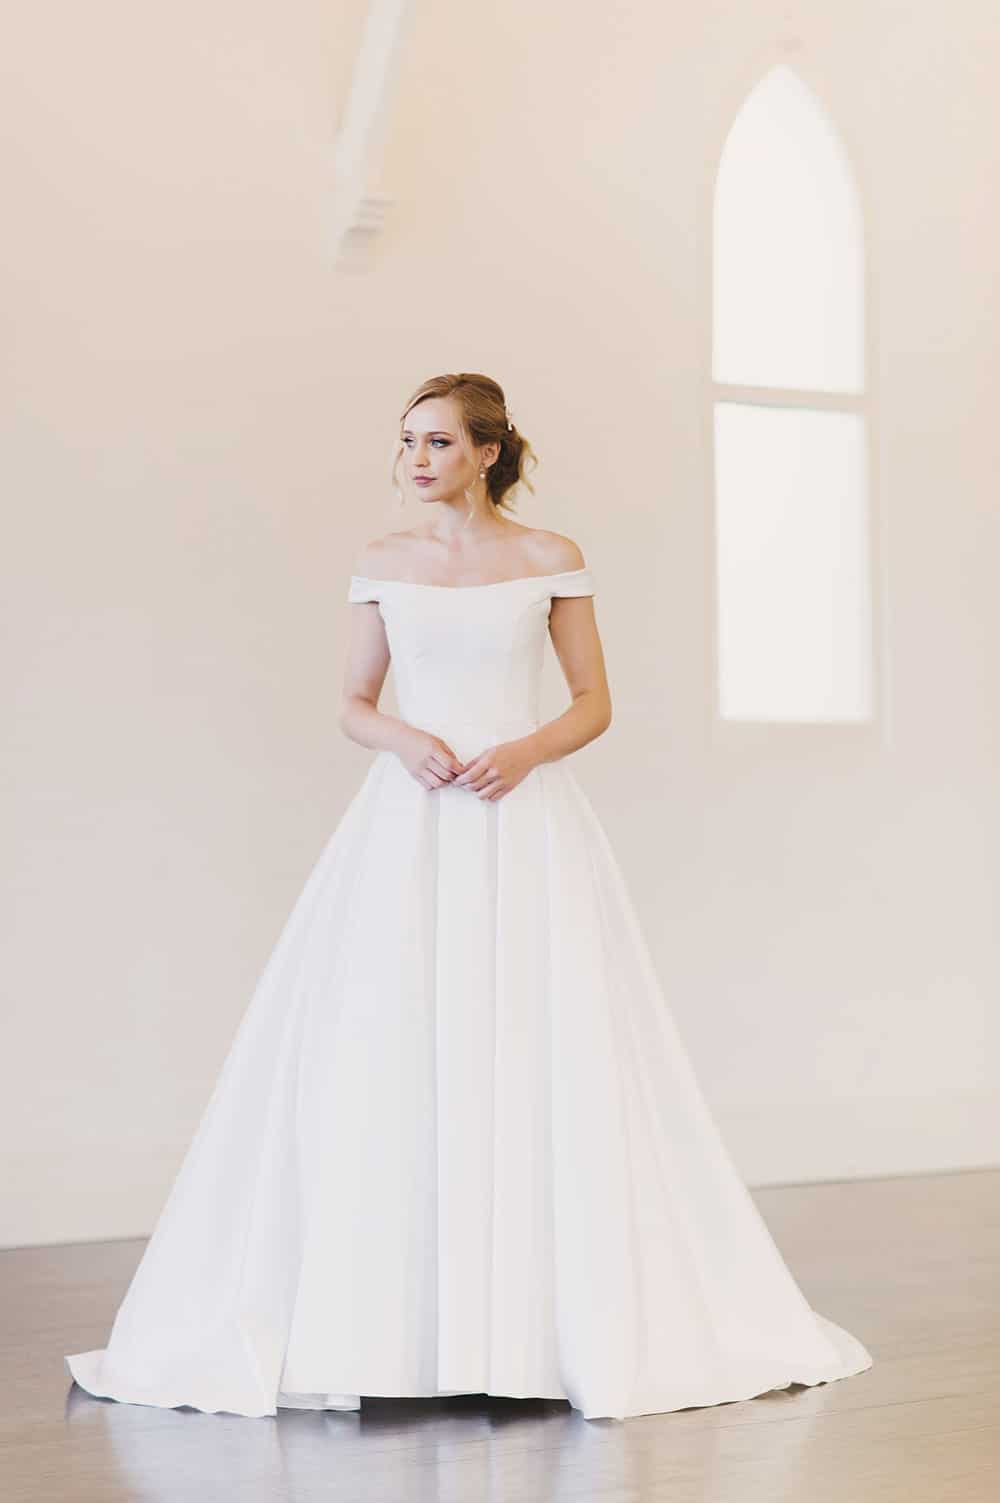 The Diana gown from Wendy Makin's Ready to Wear collection